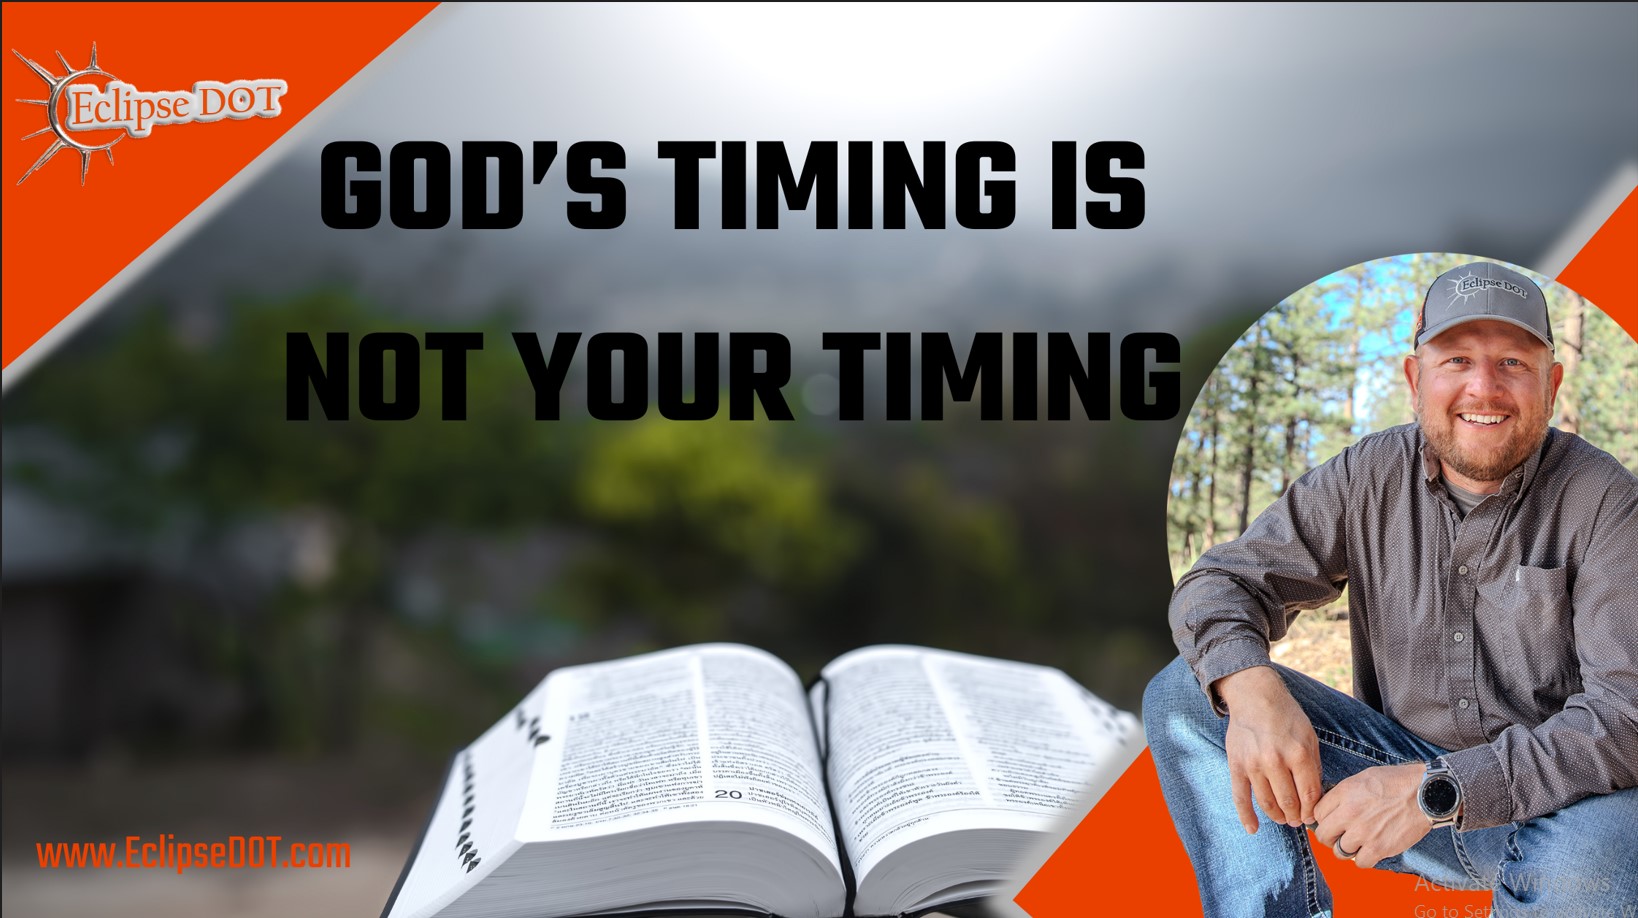 The inspirational message "God's timing is not your timing" against a serene background.